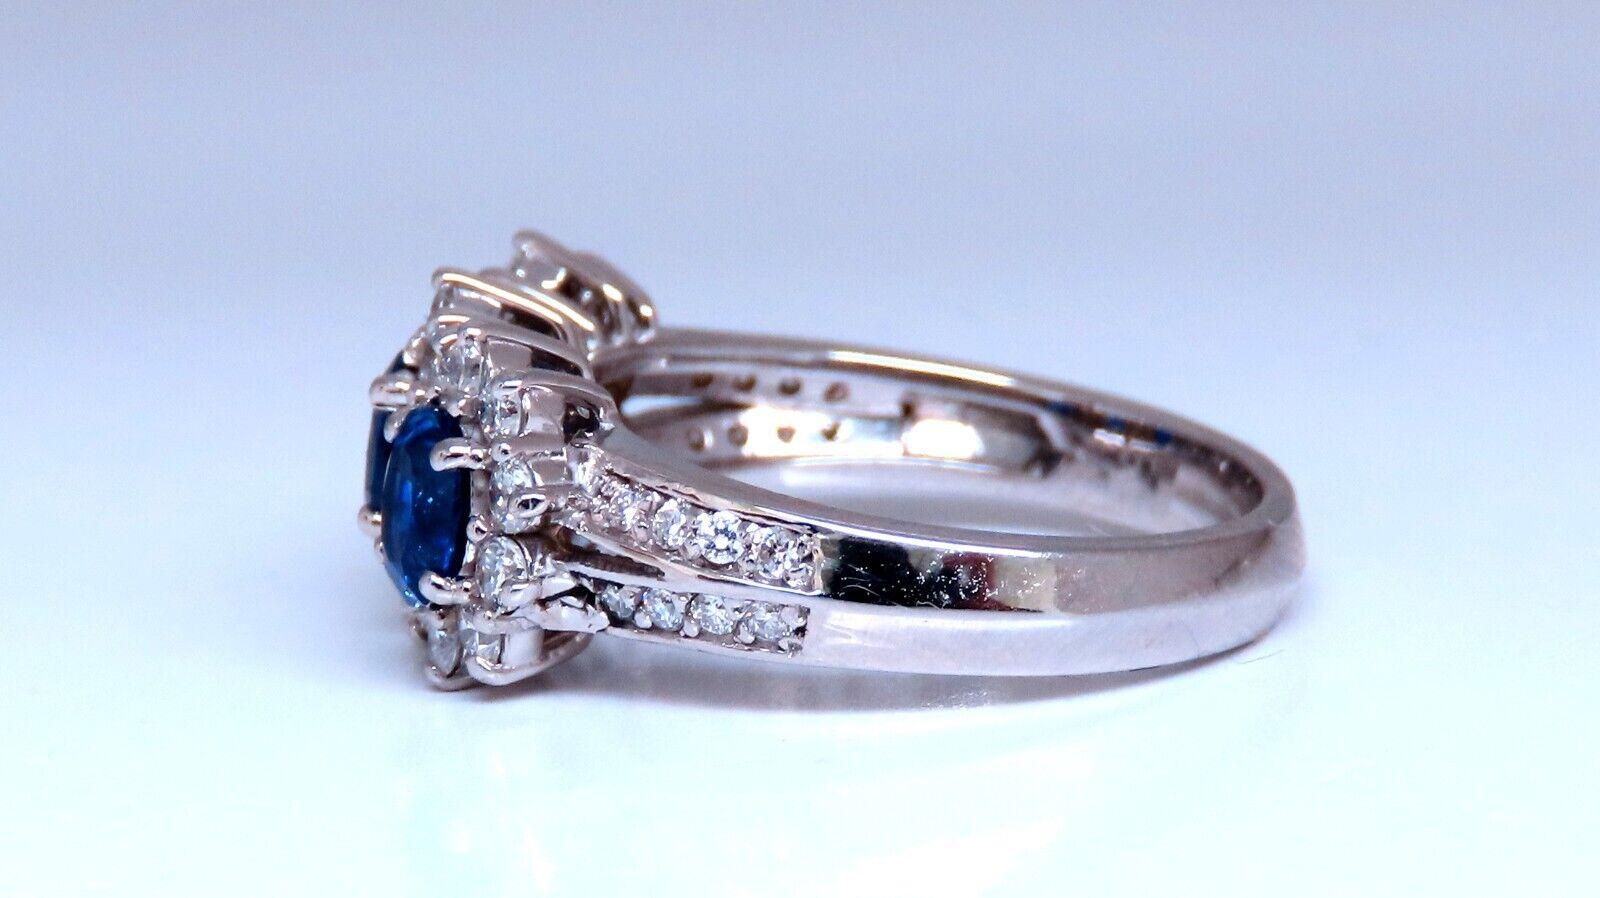 Classic Diamond & Sapphires 3 Cluster ring 

1.25ct Sapphires (Heated)

Oval Full Cut Brilliant

.70ct natural diamonds 

G-color Vs-2 Clarity

9.2mm diameter

Depth of ring: 5.4mm

current ring size:  6.25

& 

We May Resize.

Please inquire.

14Kt